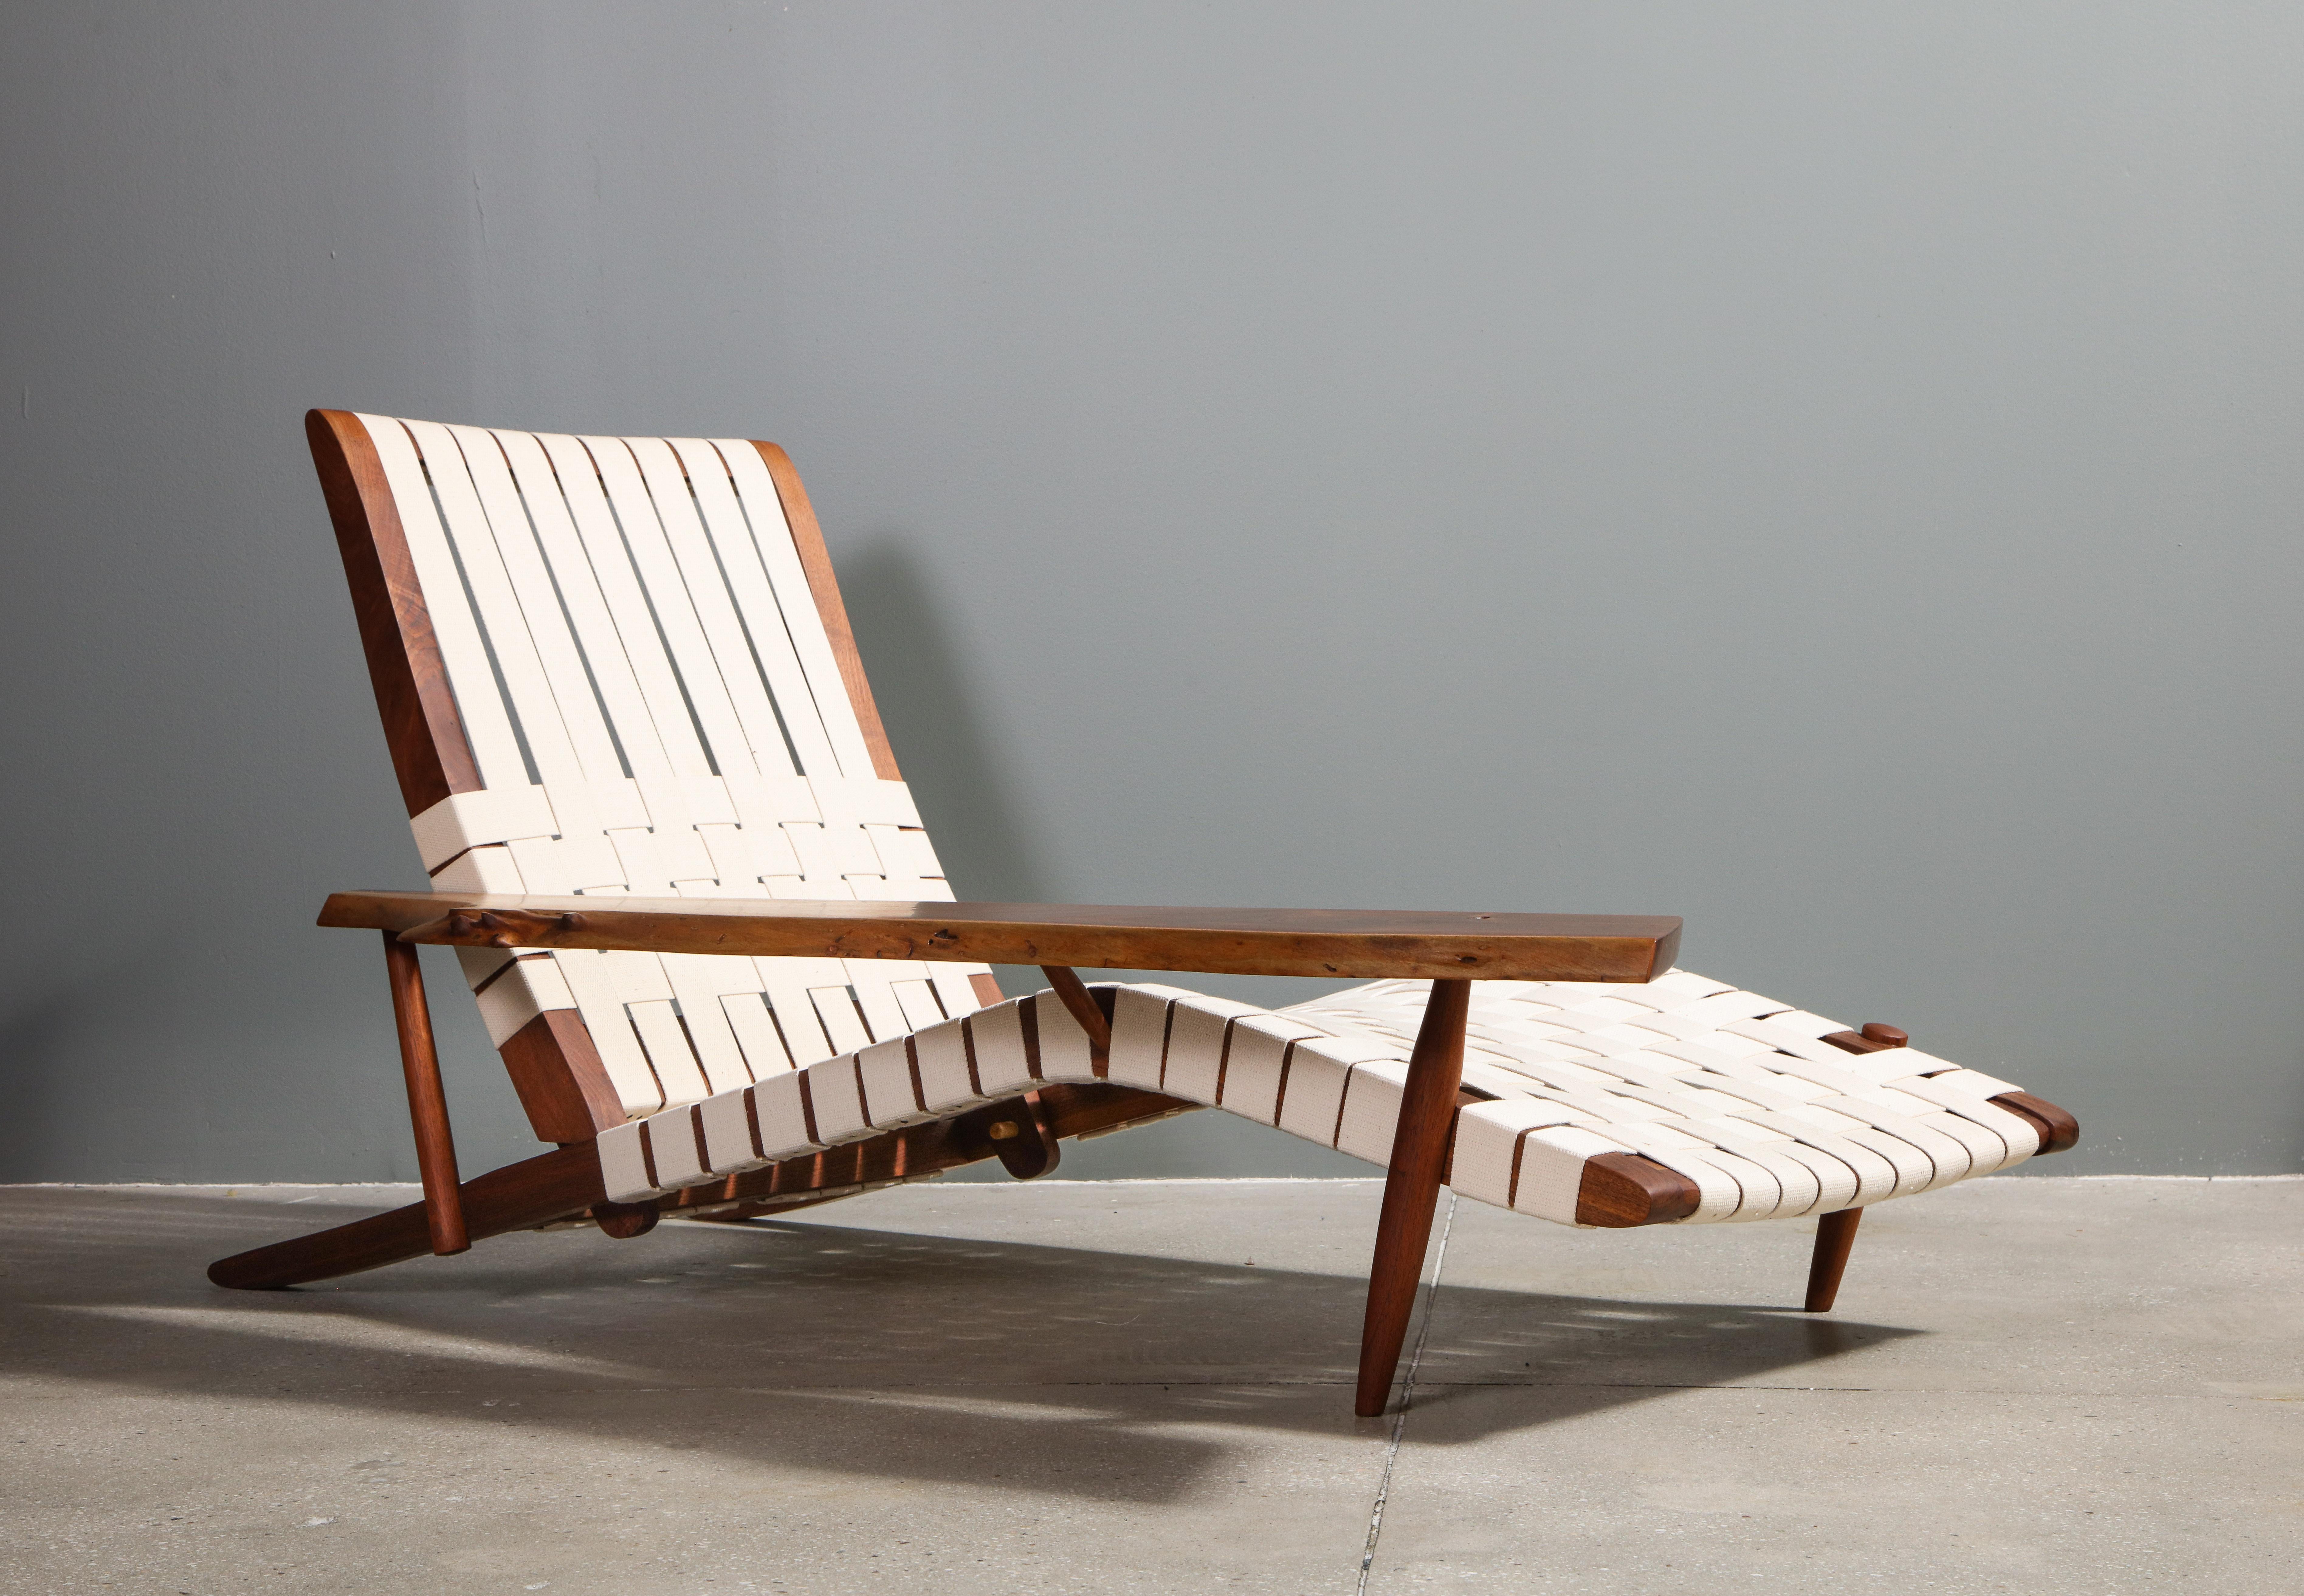 Walnut Long Chair with Single Free Form Arm, by George Nakashima, 1961